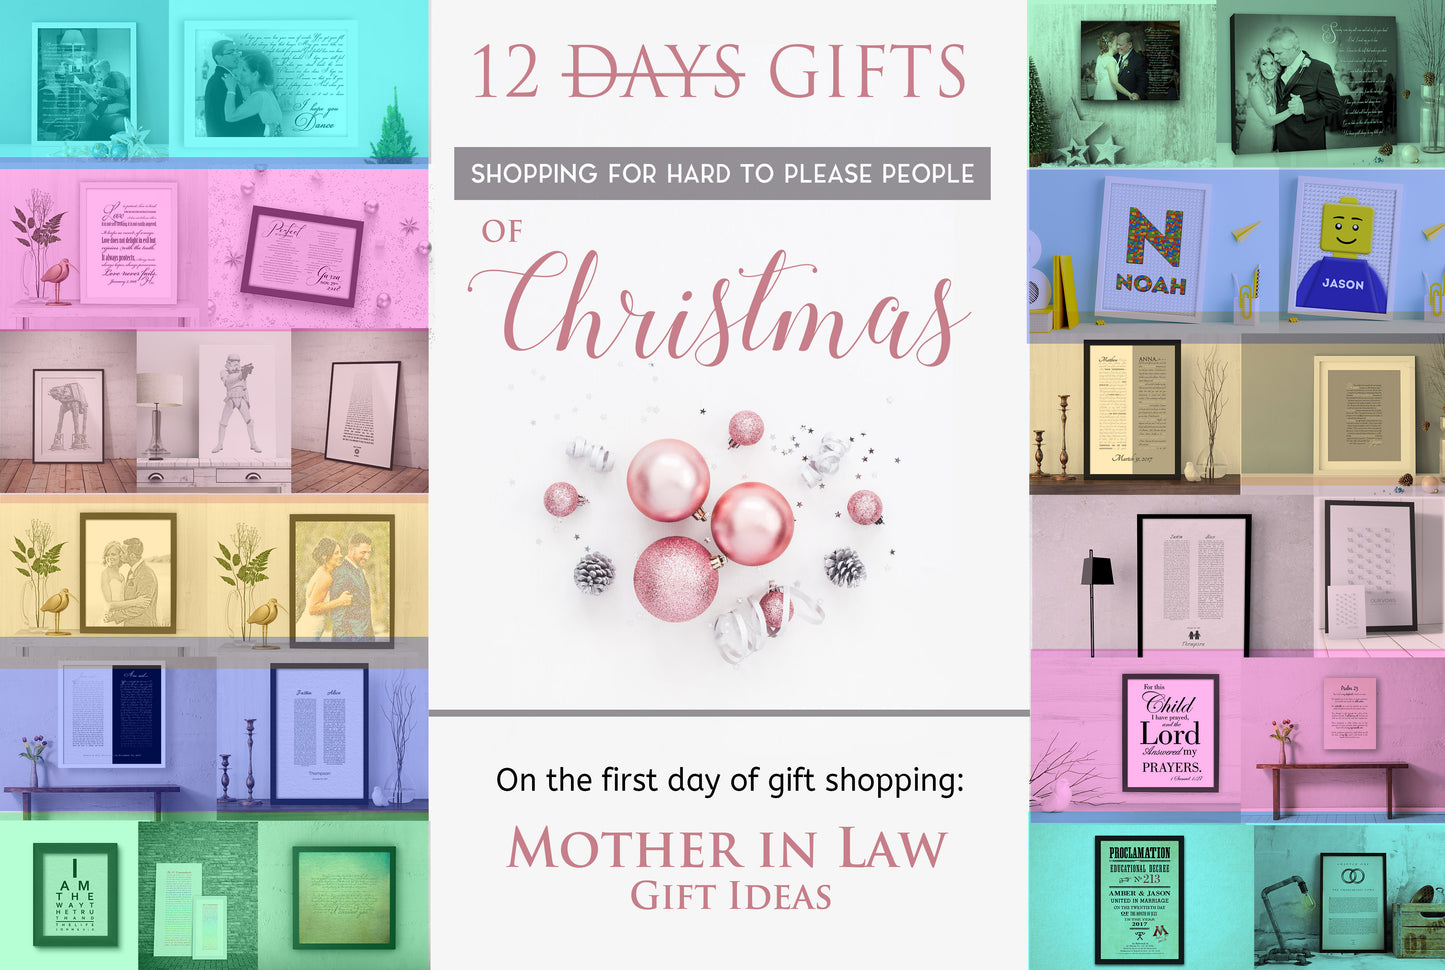 Twelve Gifts of Christmas - Shopping for Hard to Please People: Mother in Law Gift Ideas